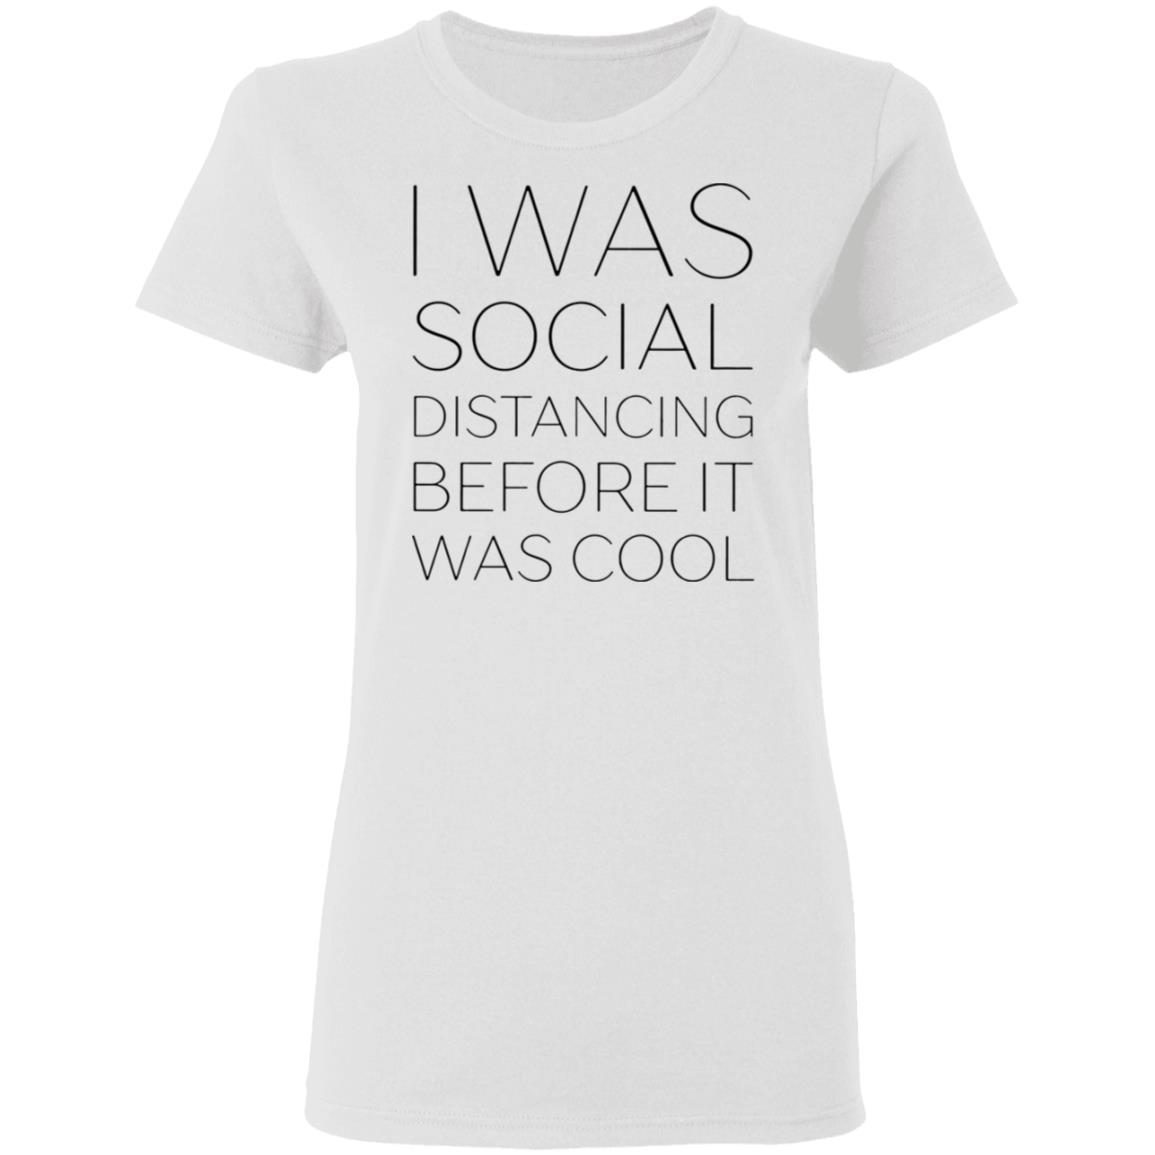 I Was Social Distancing Before It Was Cool shirt 1